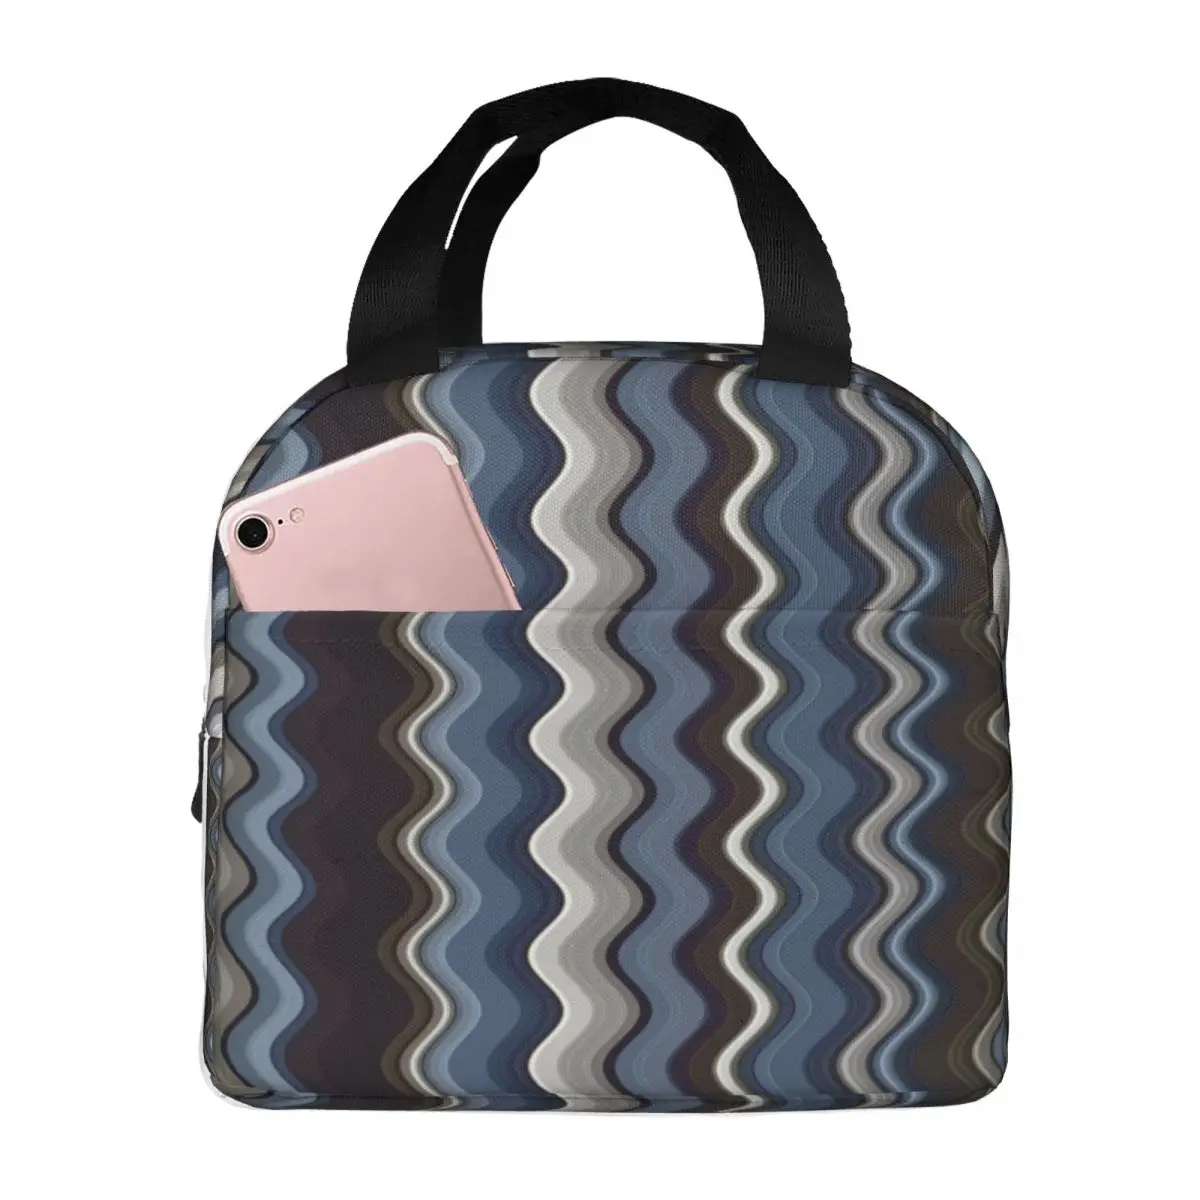 Zig Zag Multicoloured Wavy Pattern Lunch Bags Insulated Oxford Cooler Zigzag Thermal Cold Food Picnic Lunch Box for Women